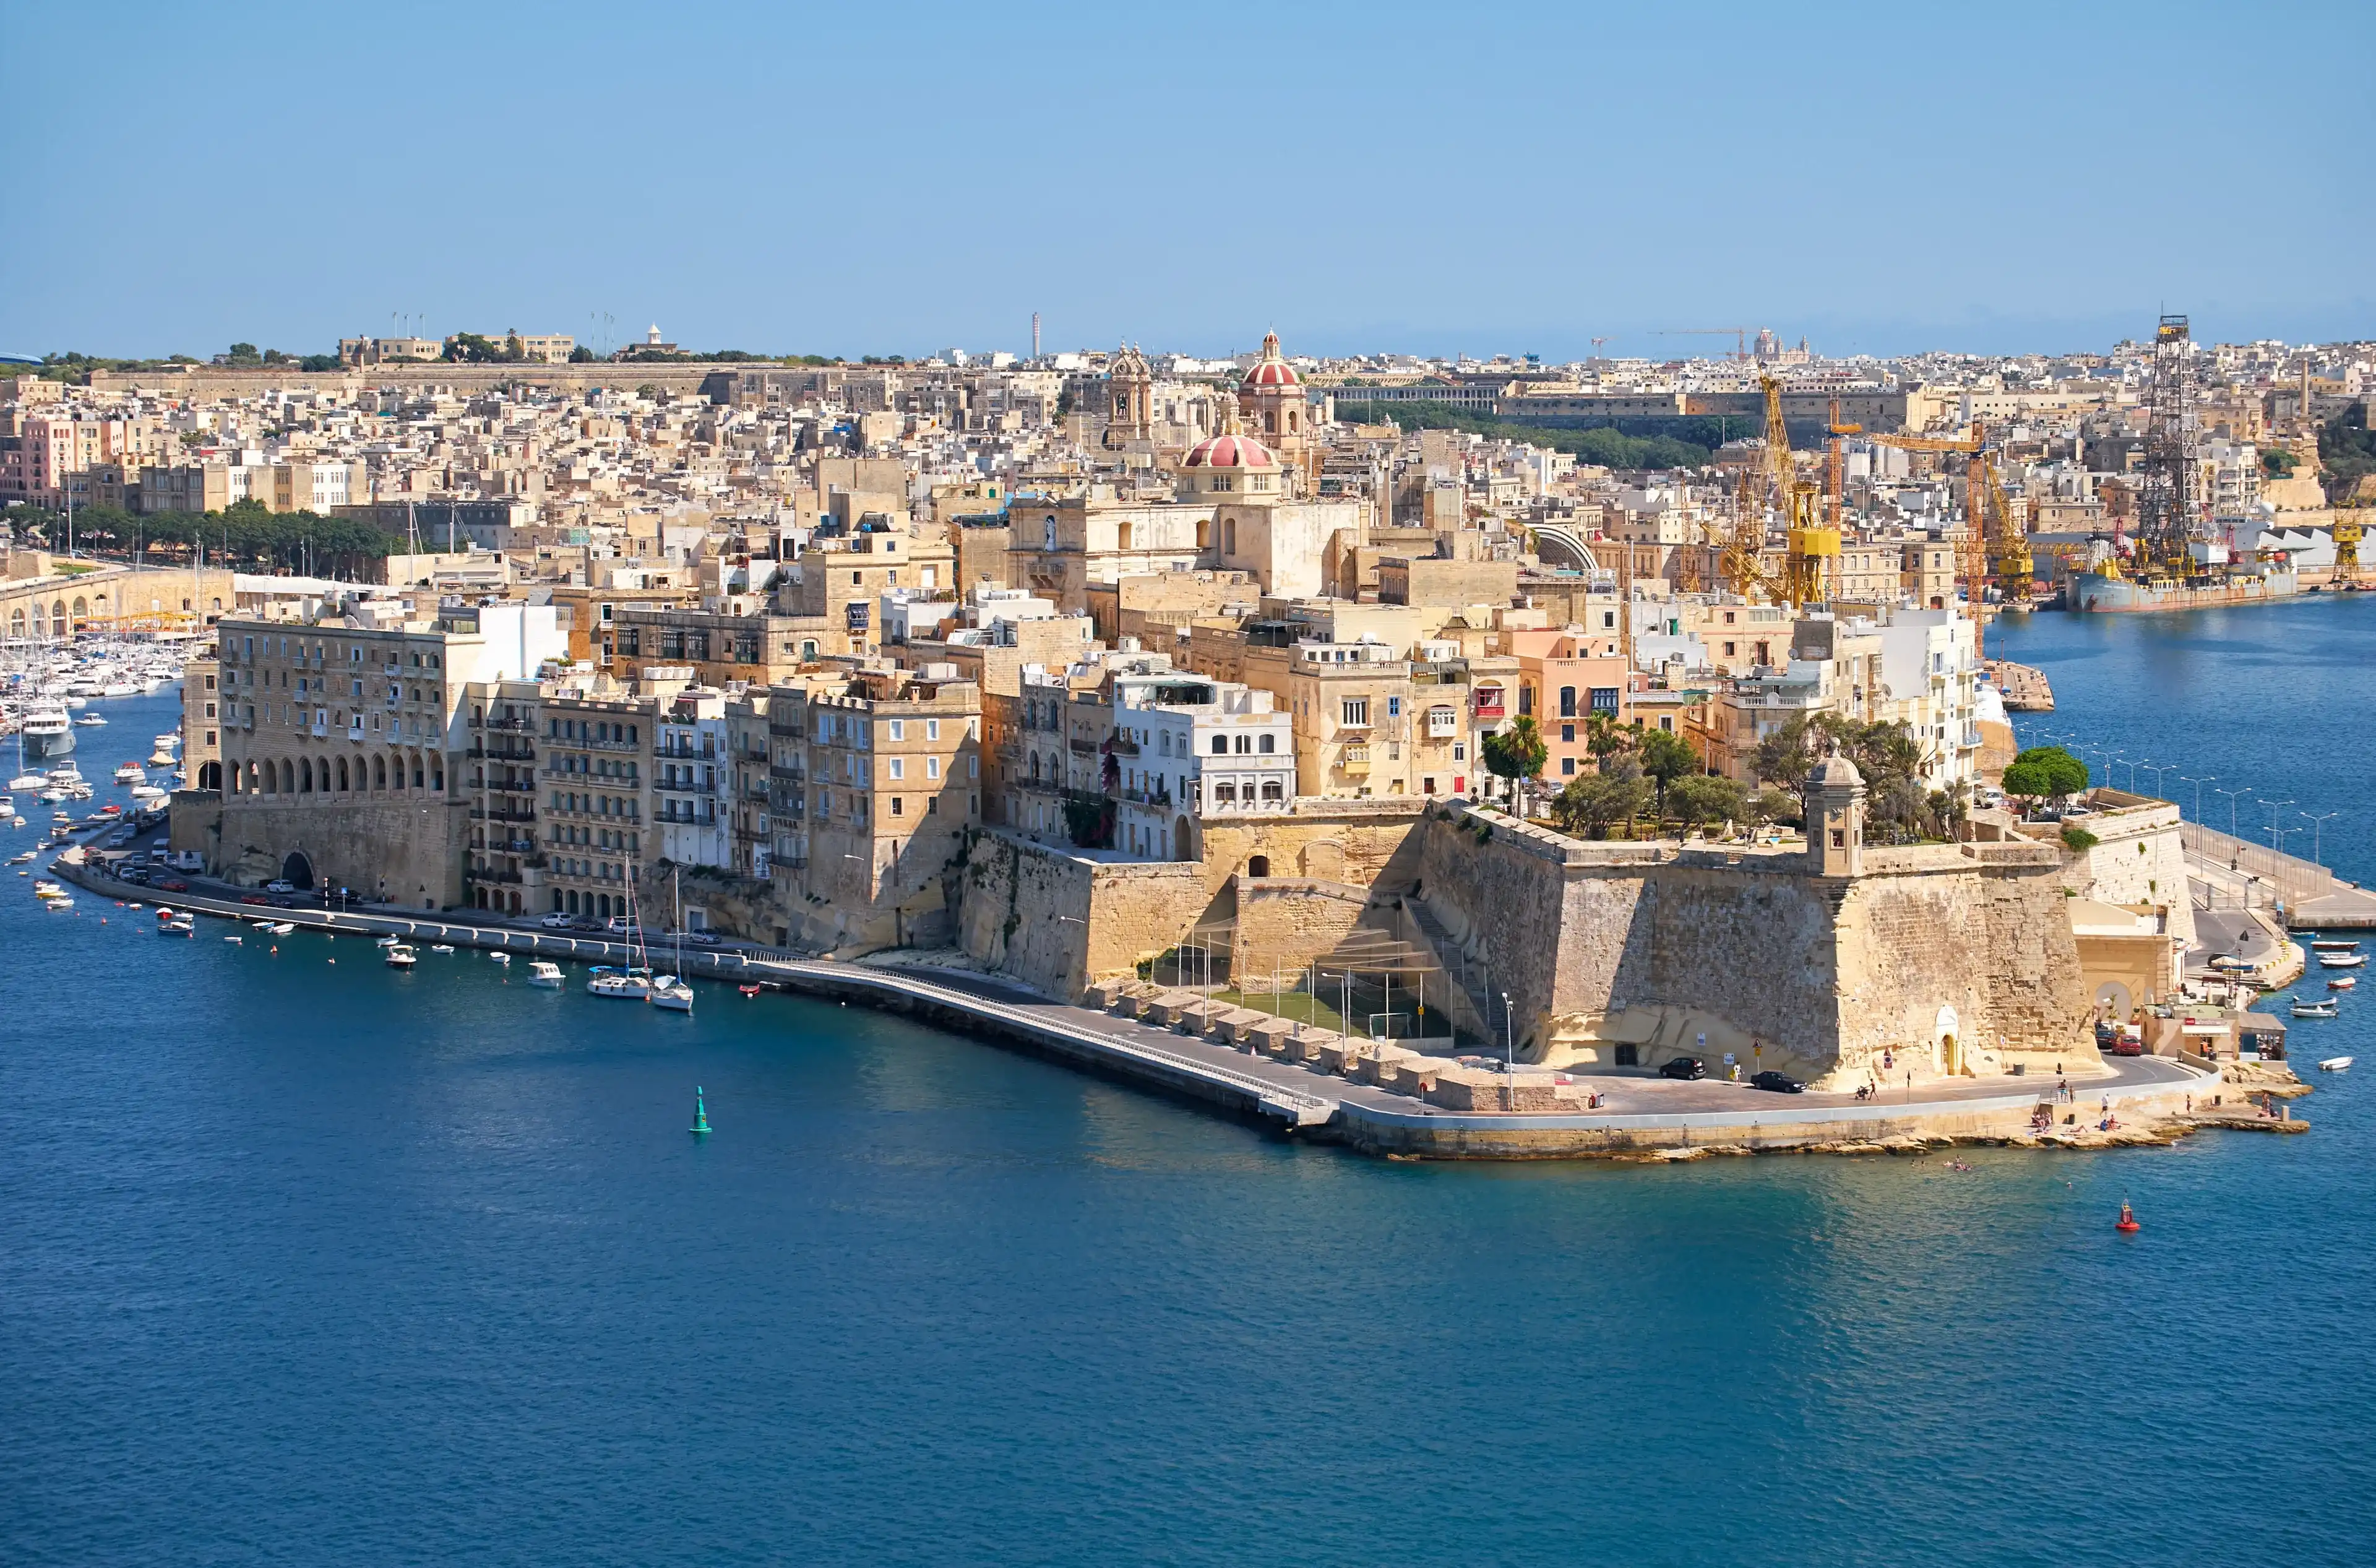 The view of Grand Harbour and Senglea (L-isla) peninsula with Fort Saint Michael on the tip from the bordering terrace of the Upper Barrakka Gardens. Malta 